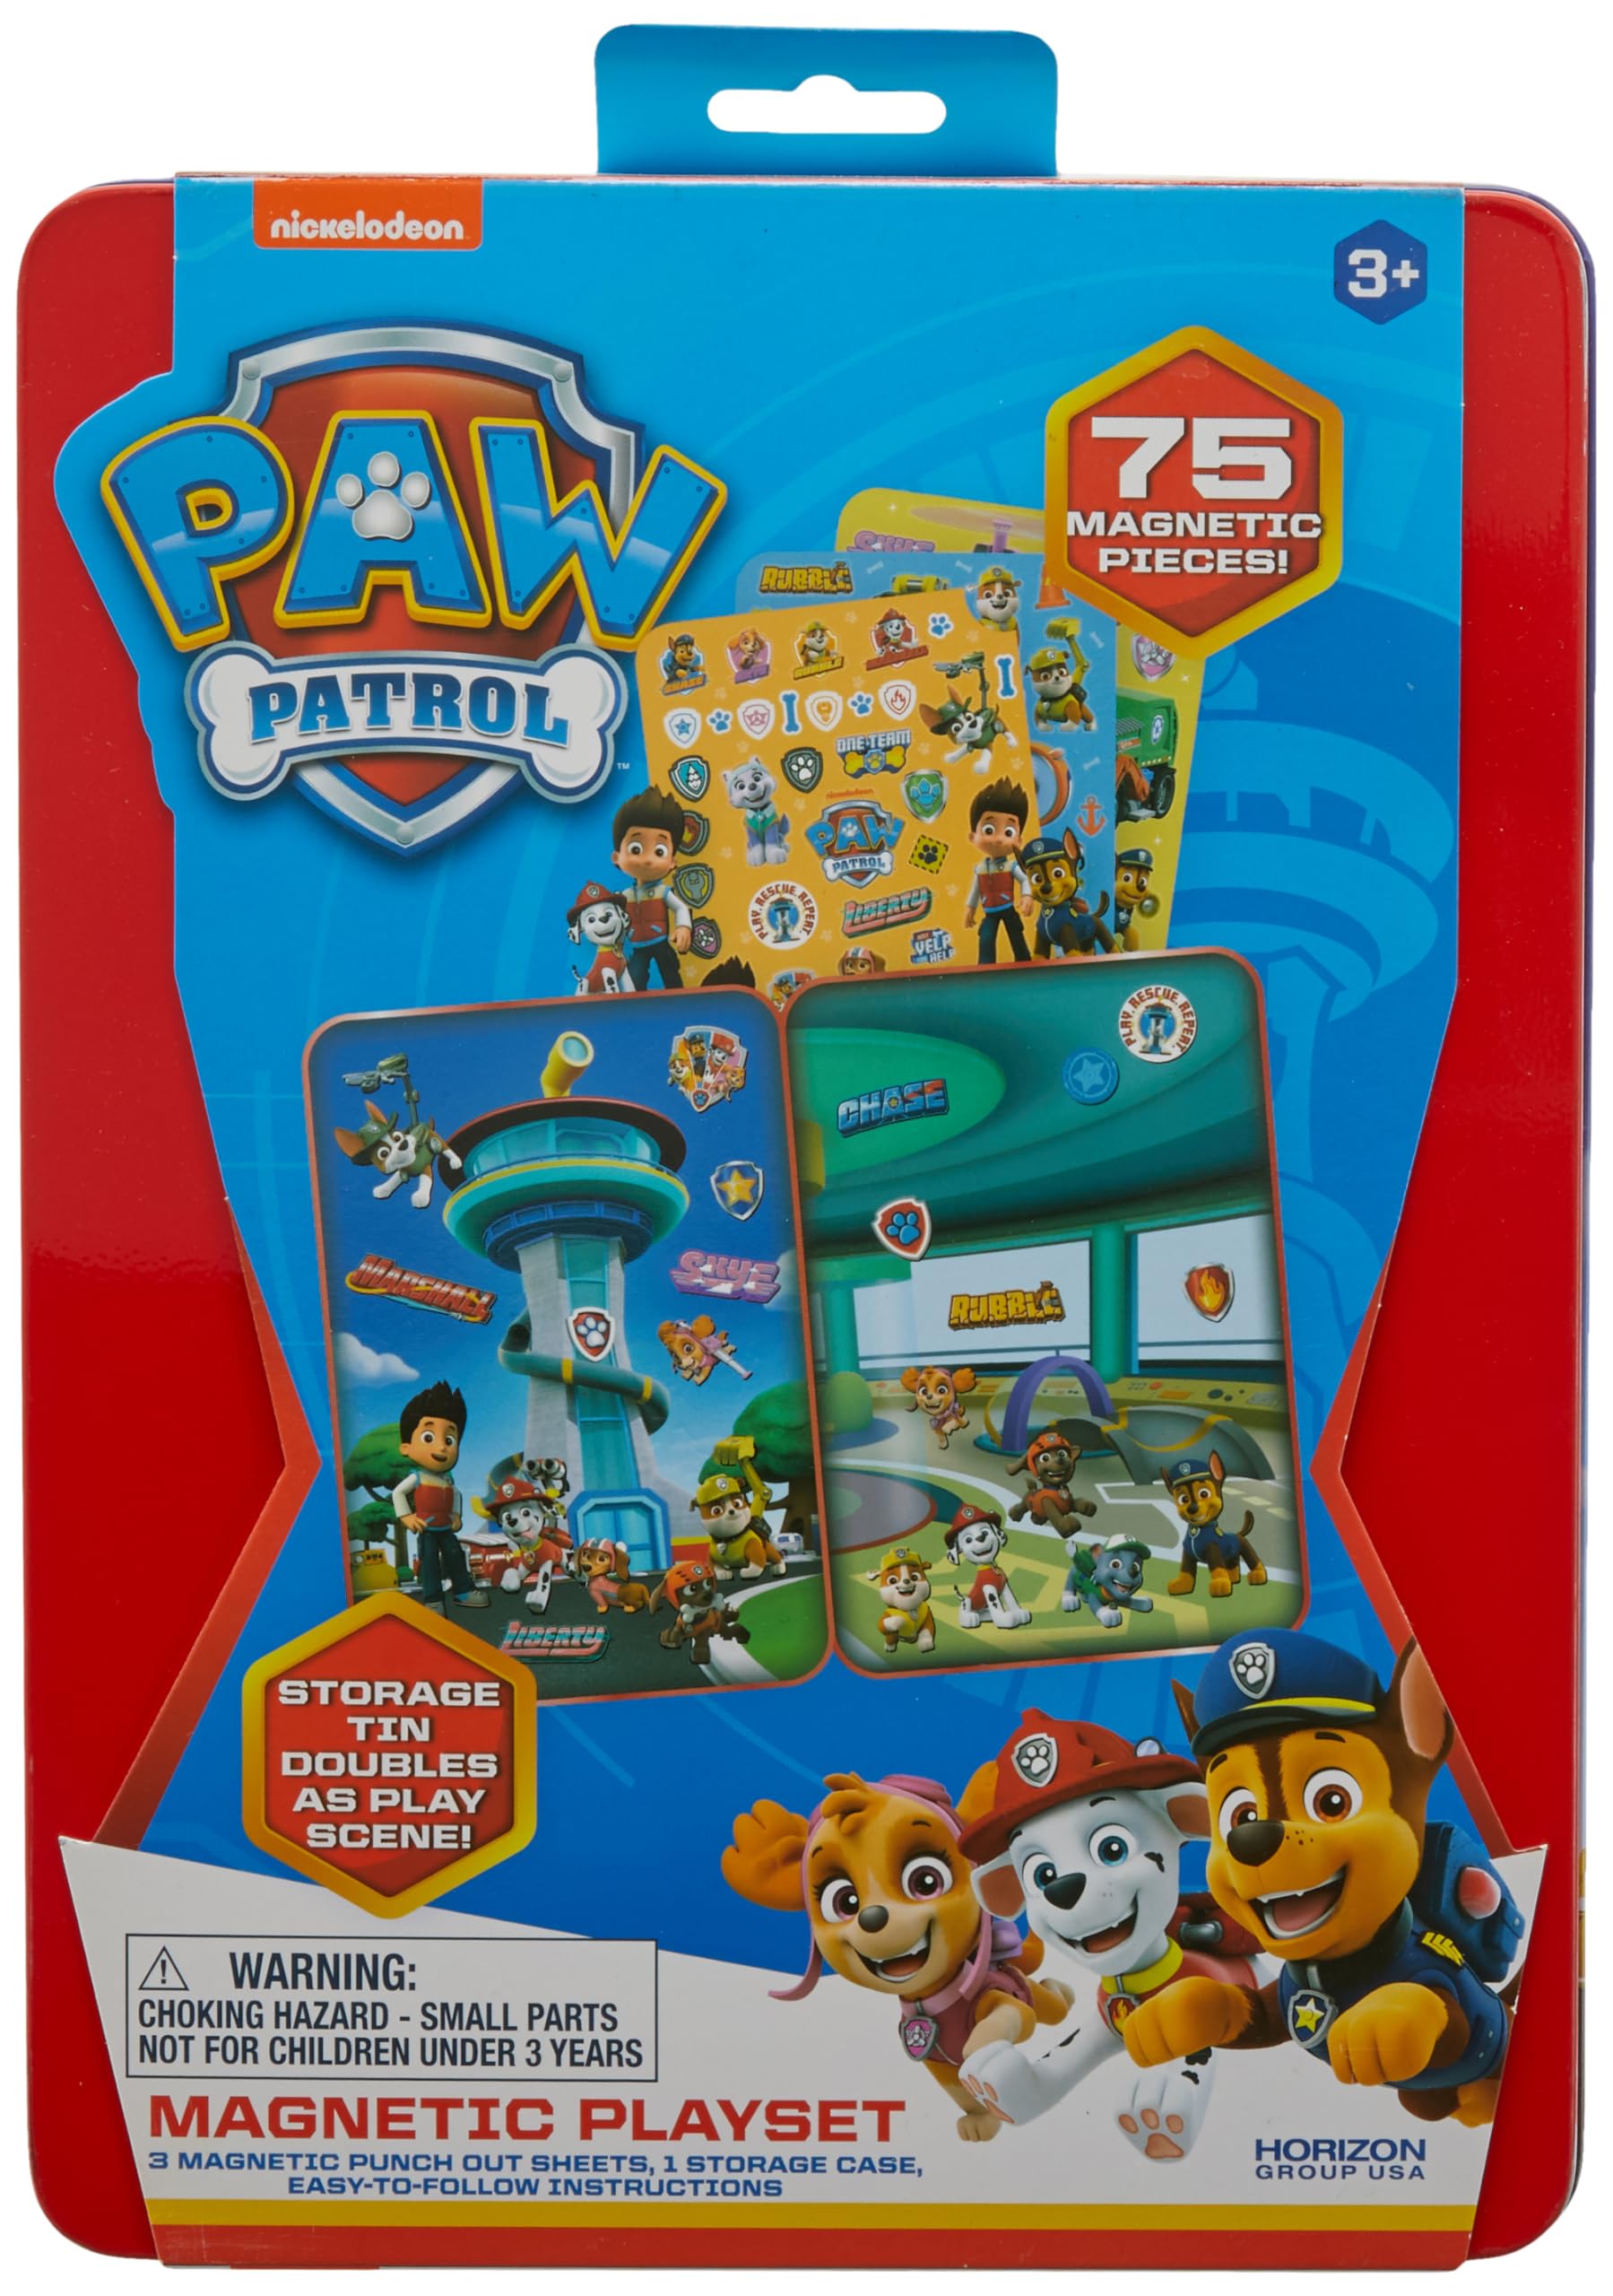 Paw Patrol Magnetic Playset, 75 Mix & Match Dress Up Magnets, 2-in-1 Storage Tin & Play Space, Fun Paw Patrol Toy for Kids 3 & Up, Great Travel Activity for Kids and Toddlers, Paw Patrol Activities